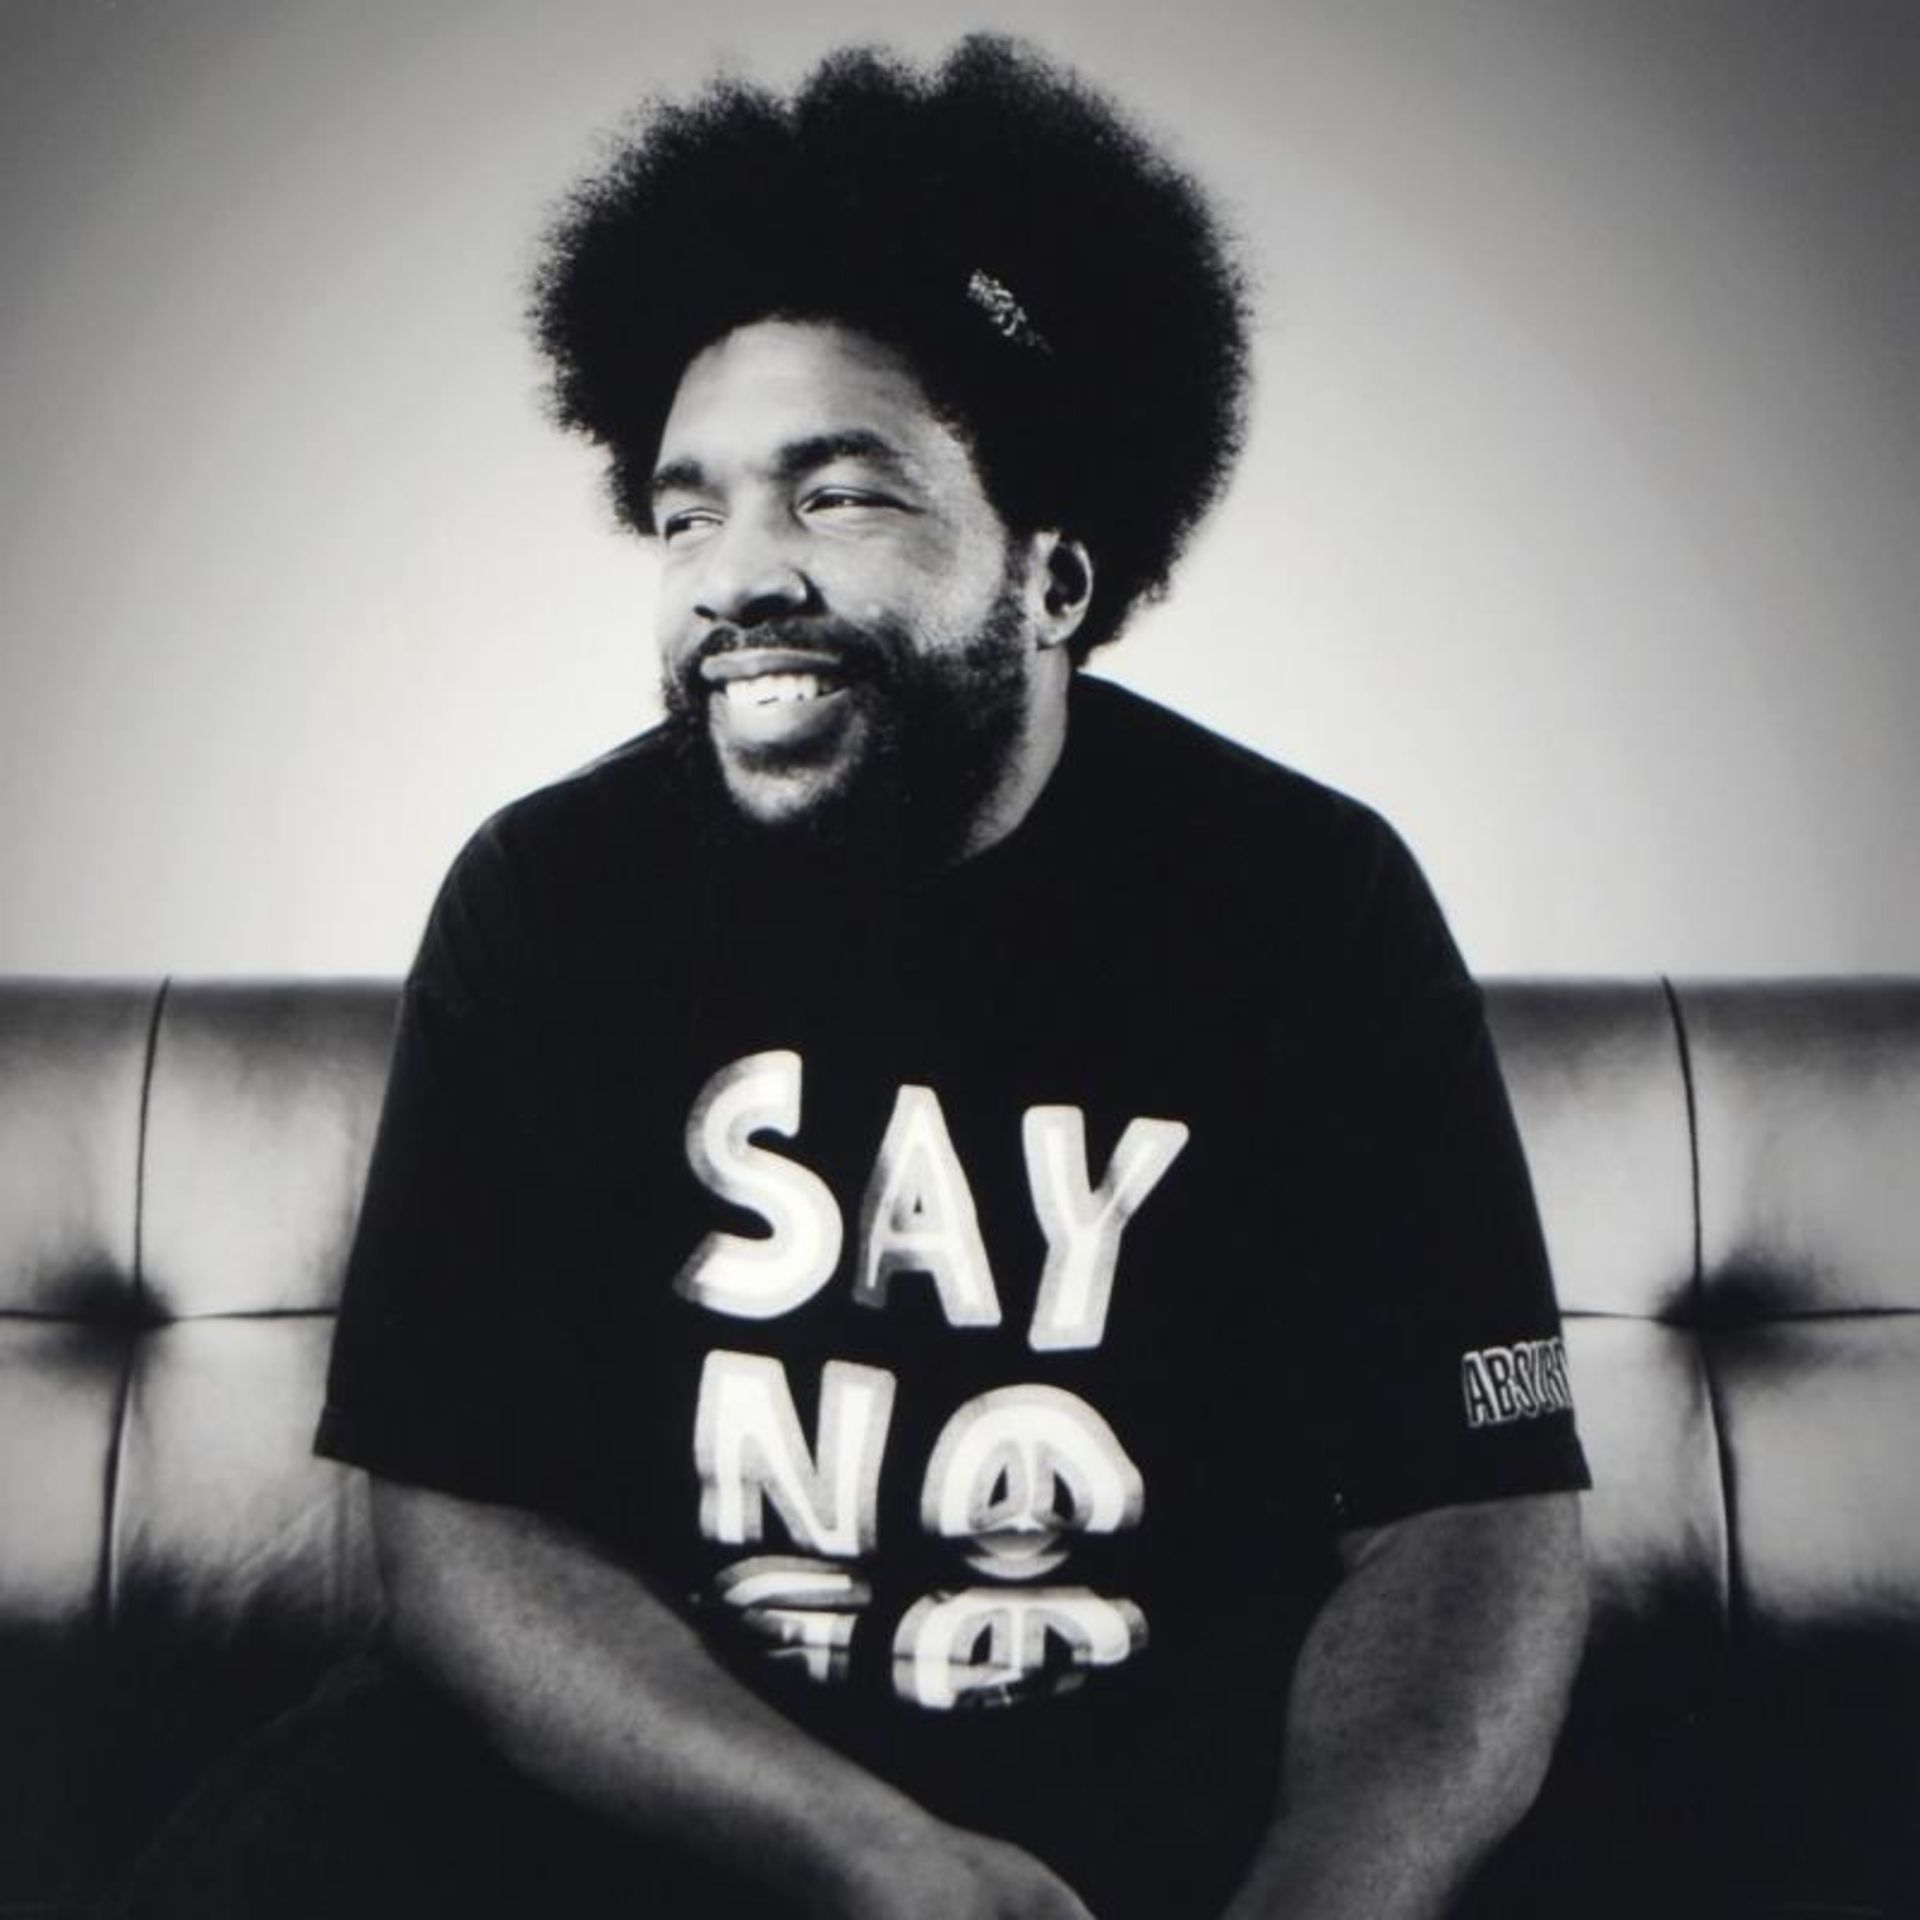 Questlove by Shanahan, Rob - Image 3 of 4